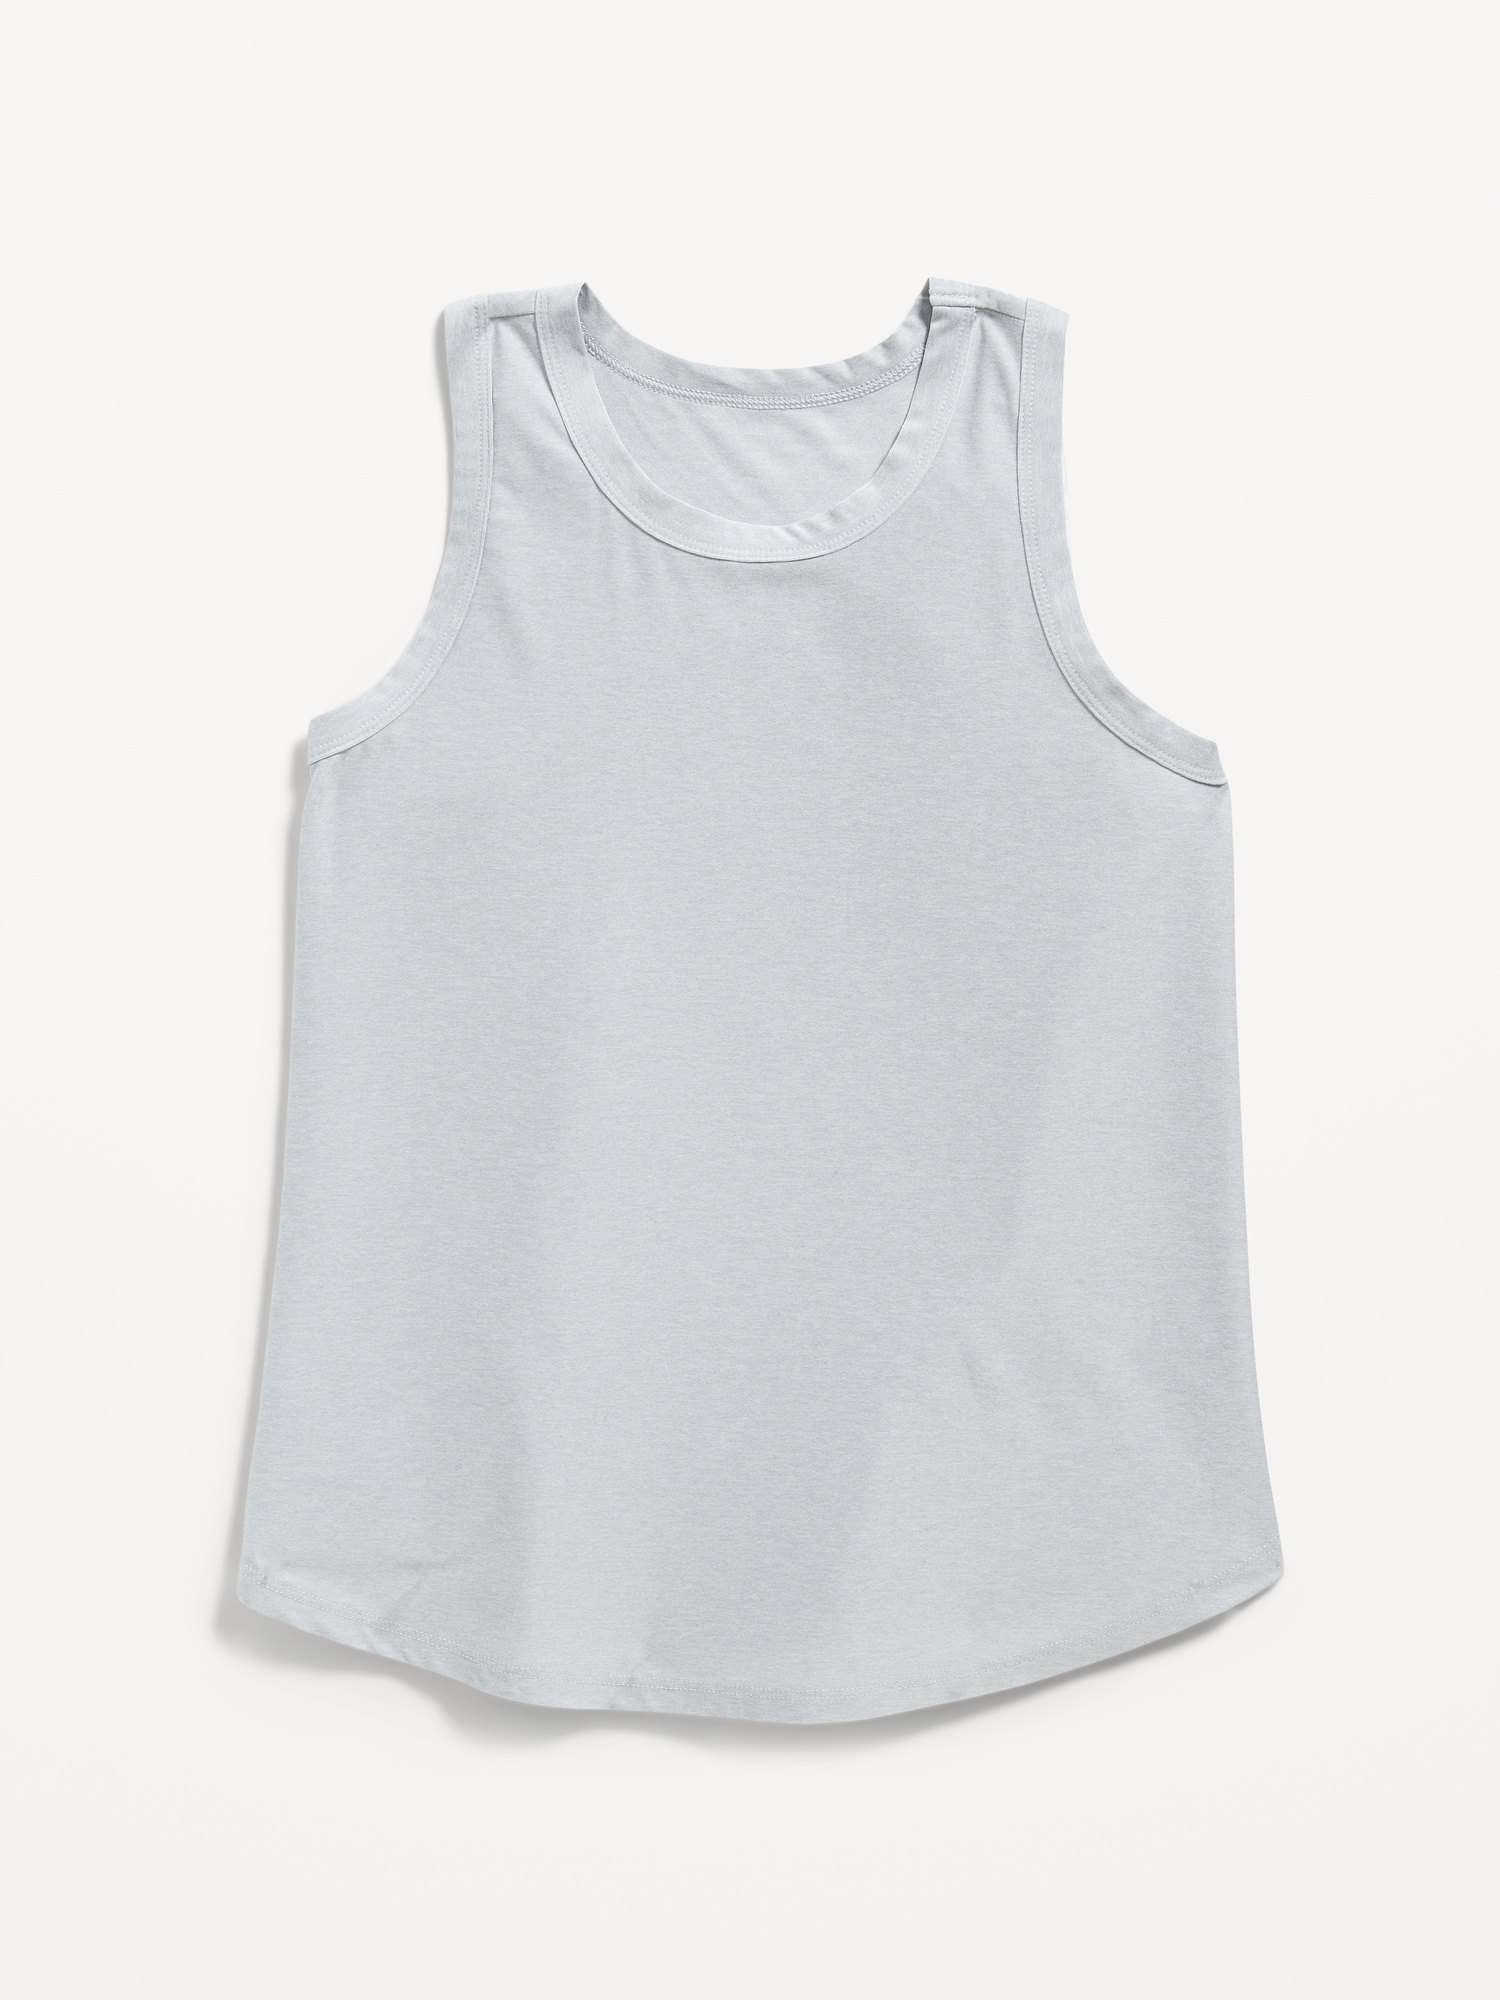 Cloud 94 Soft Go-Dry Cool Tunic Tank Top for Girls | Old Navy